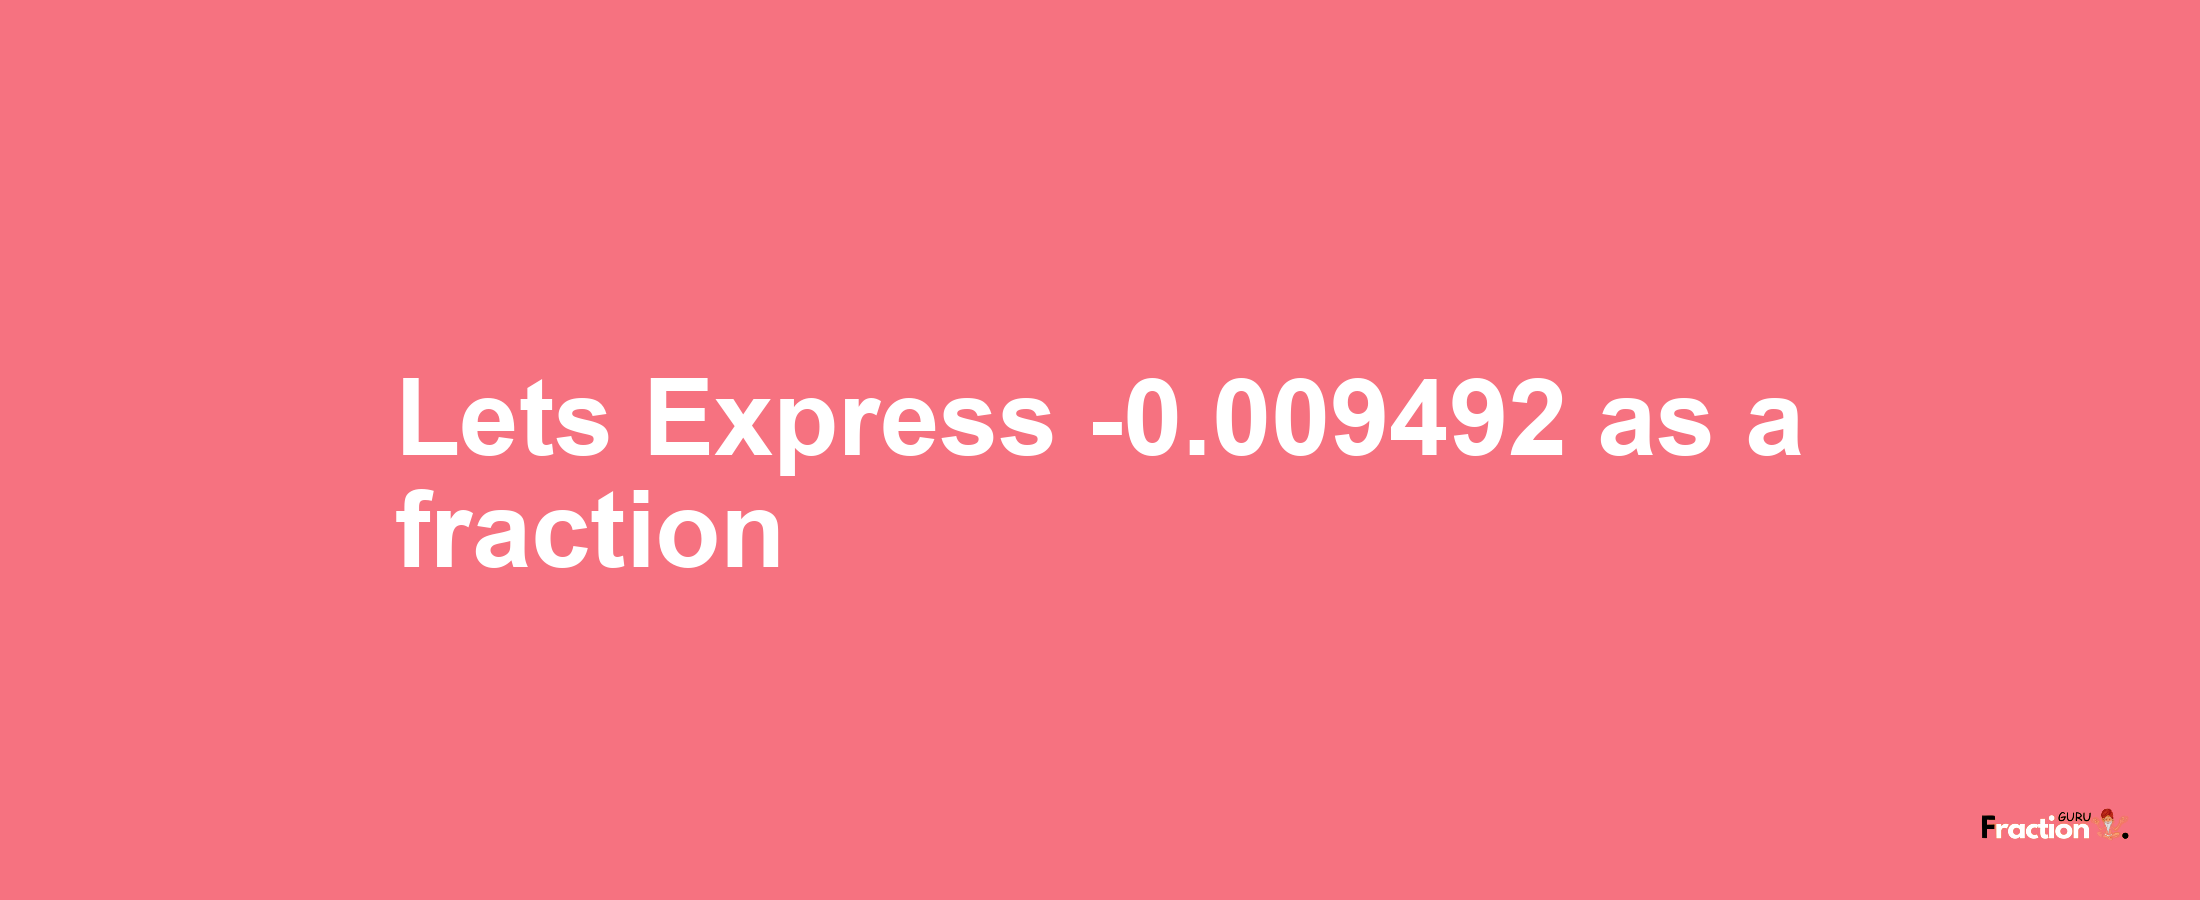 Lets Express -0.009492 as afraction